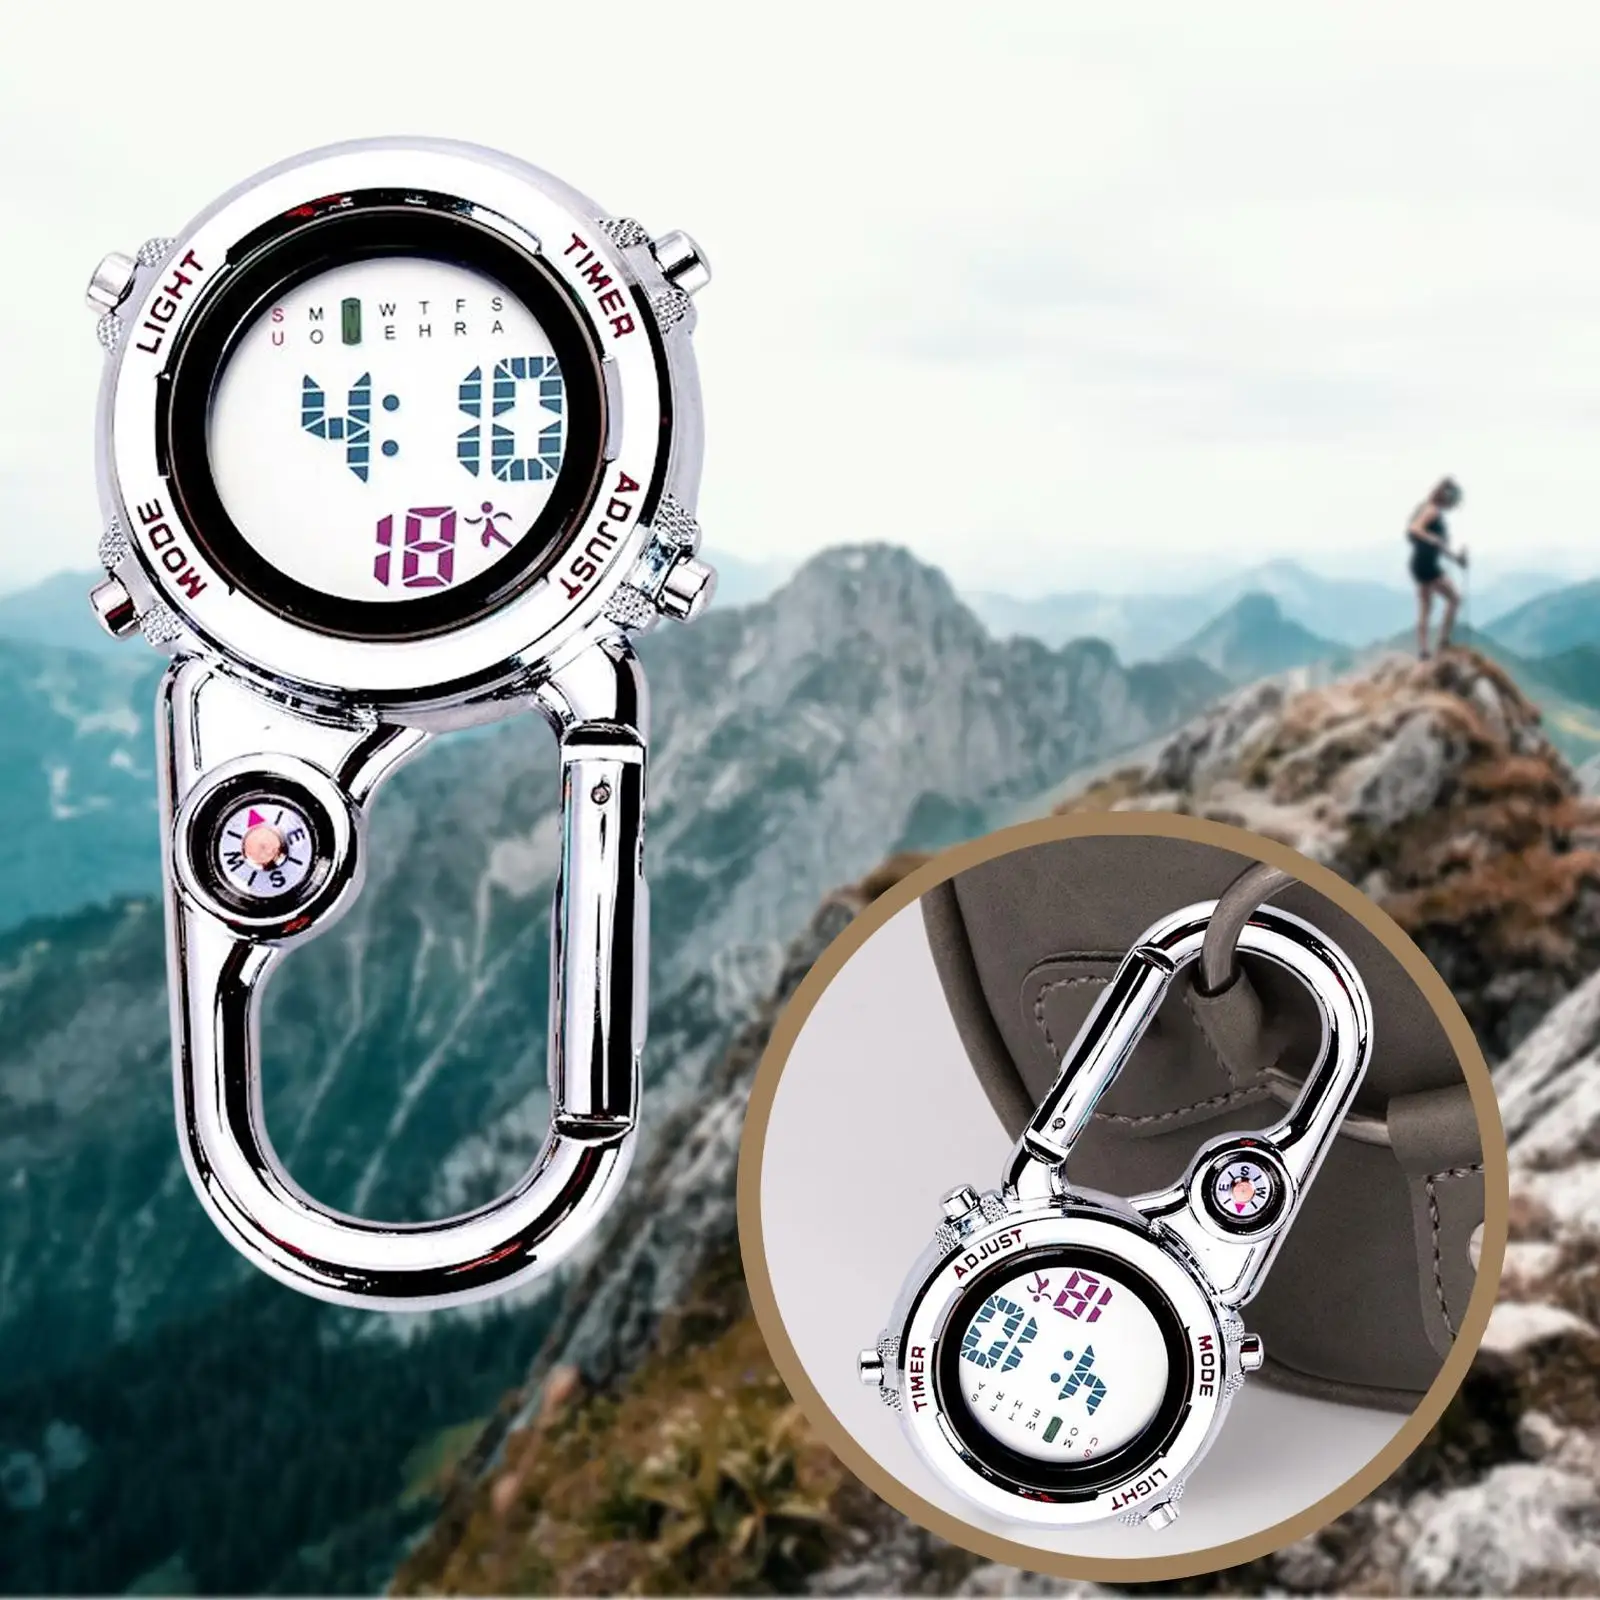 Multifunctional Carabiner Watch with Backlight Backpack Fob Watch for Men and Women for Outdoor Home